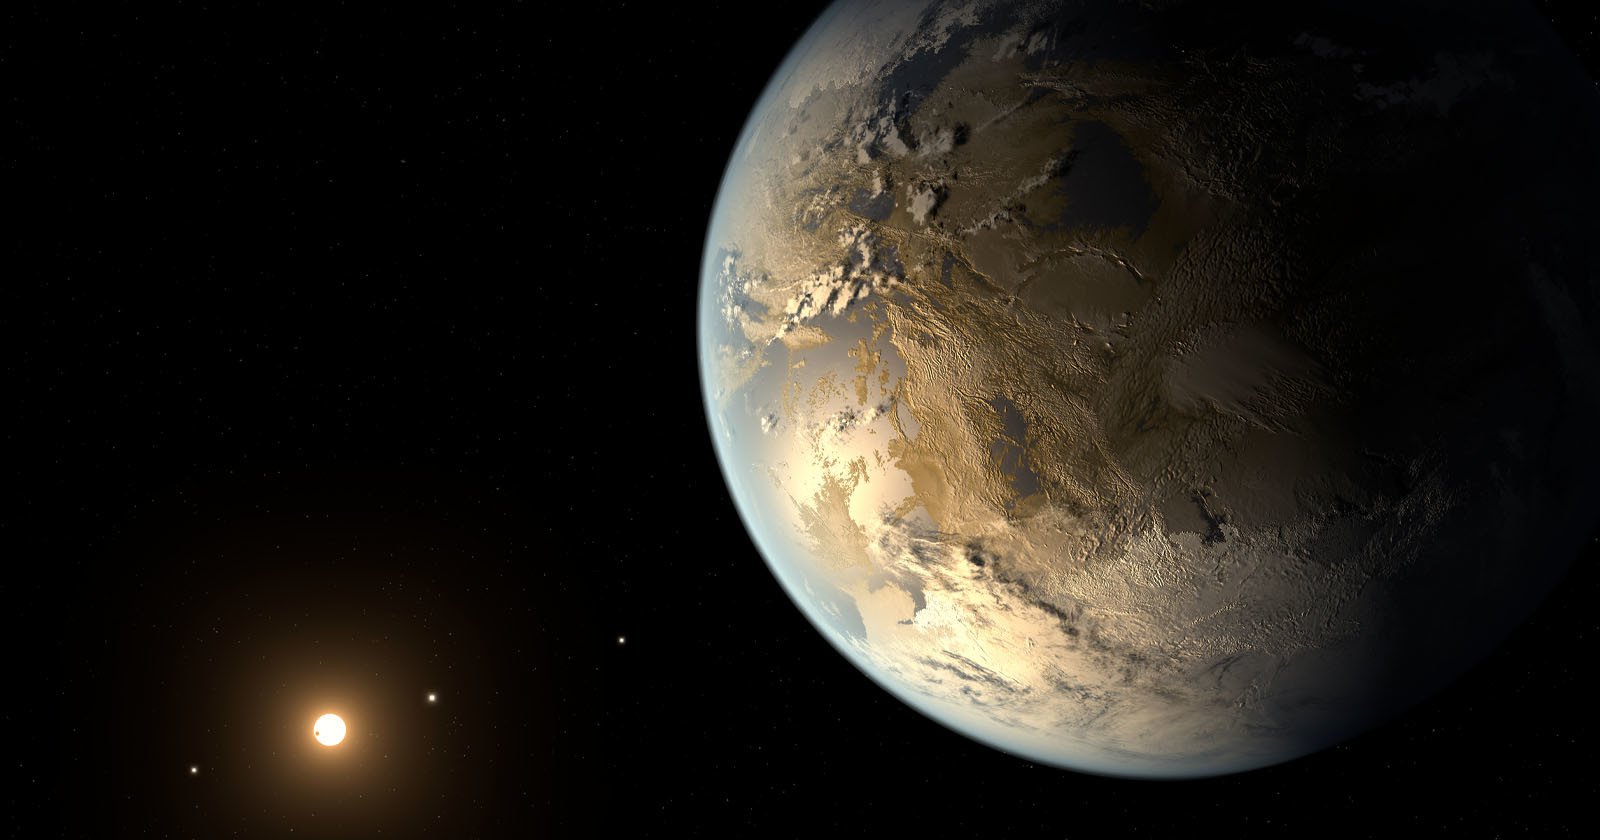  planetary photobombers complicate search another earth 